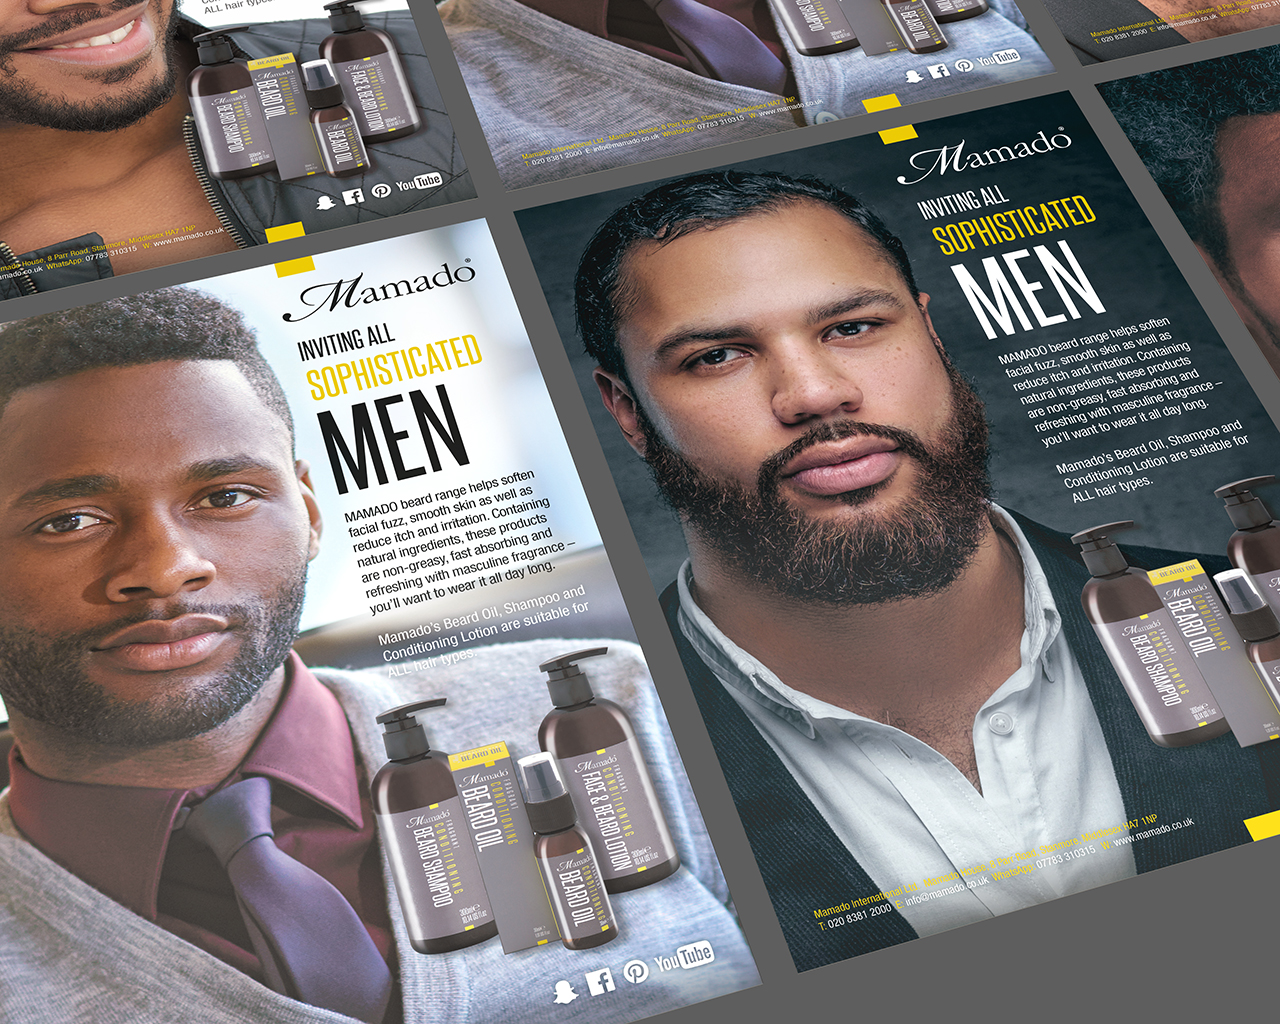 Men's face and beard care range magazine adverts designed by Paul Cartwright Branding.